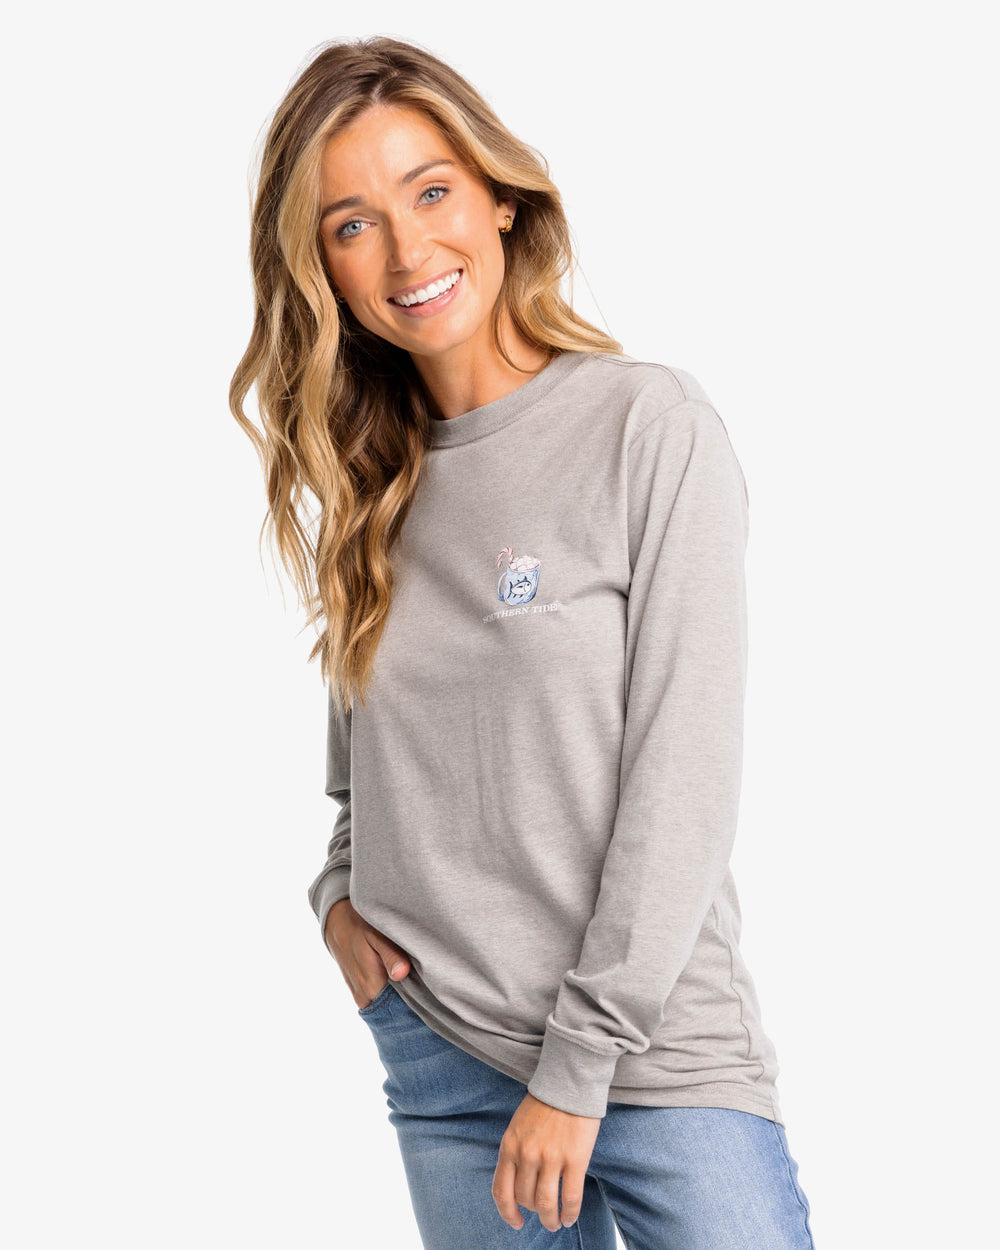 The front view of the Southern Tide Heather Hot Cocoa Long Sleeve T-Shirt by Southern Tide - Heather Quarry